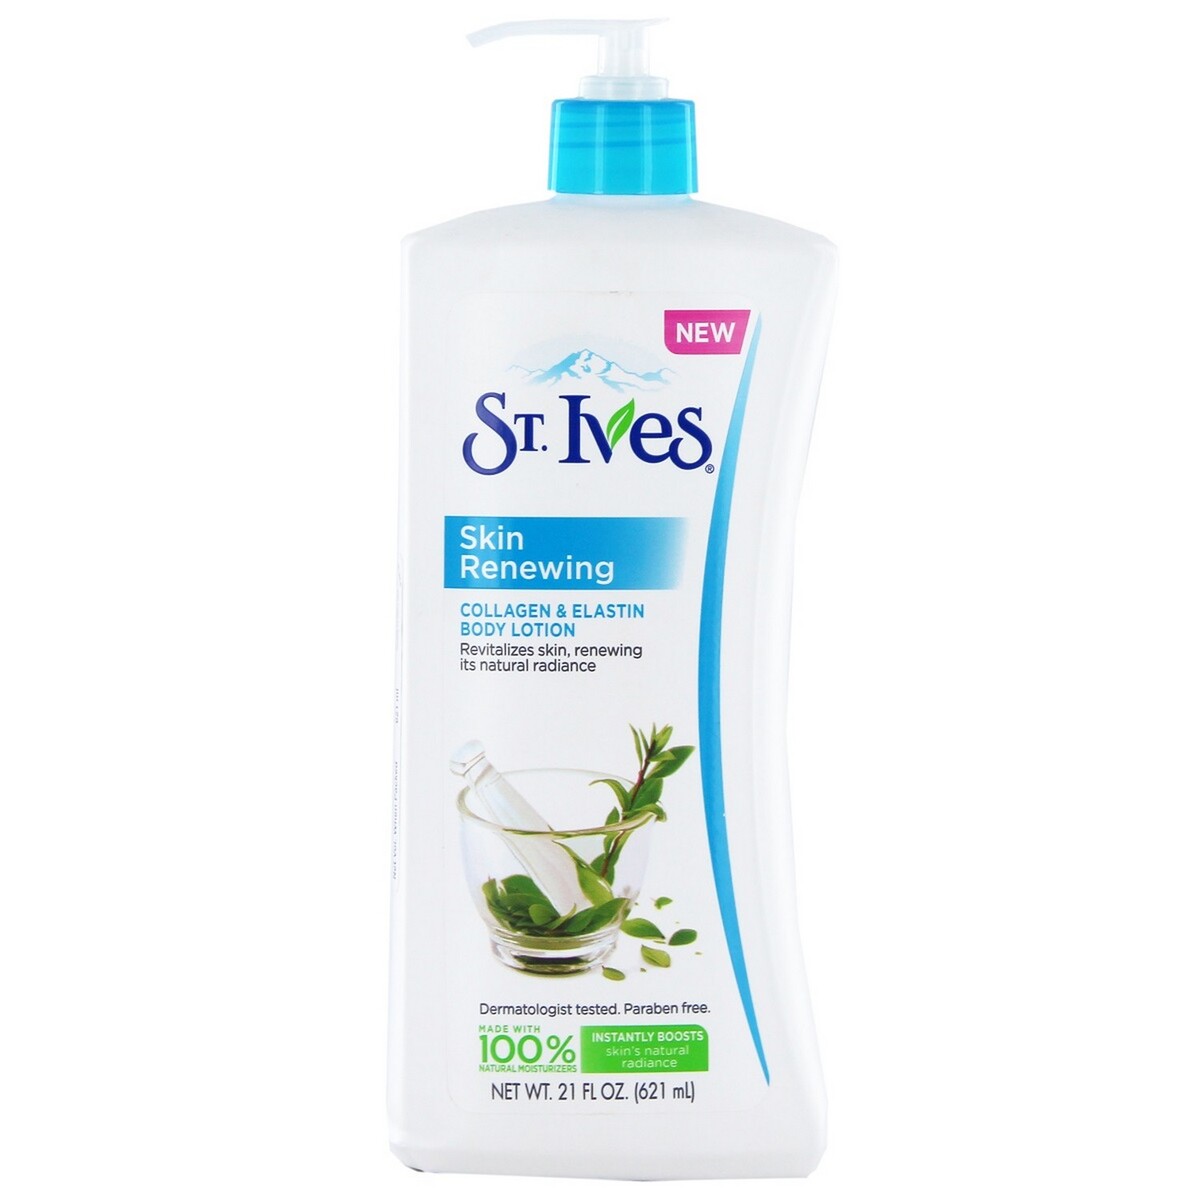 ST.Ives Body Lotion Skin Renewing 621ml